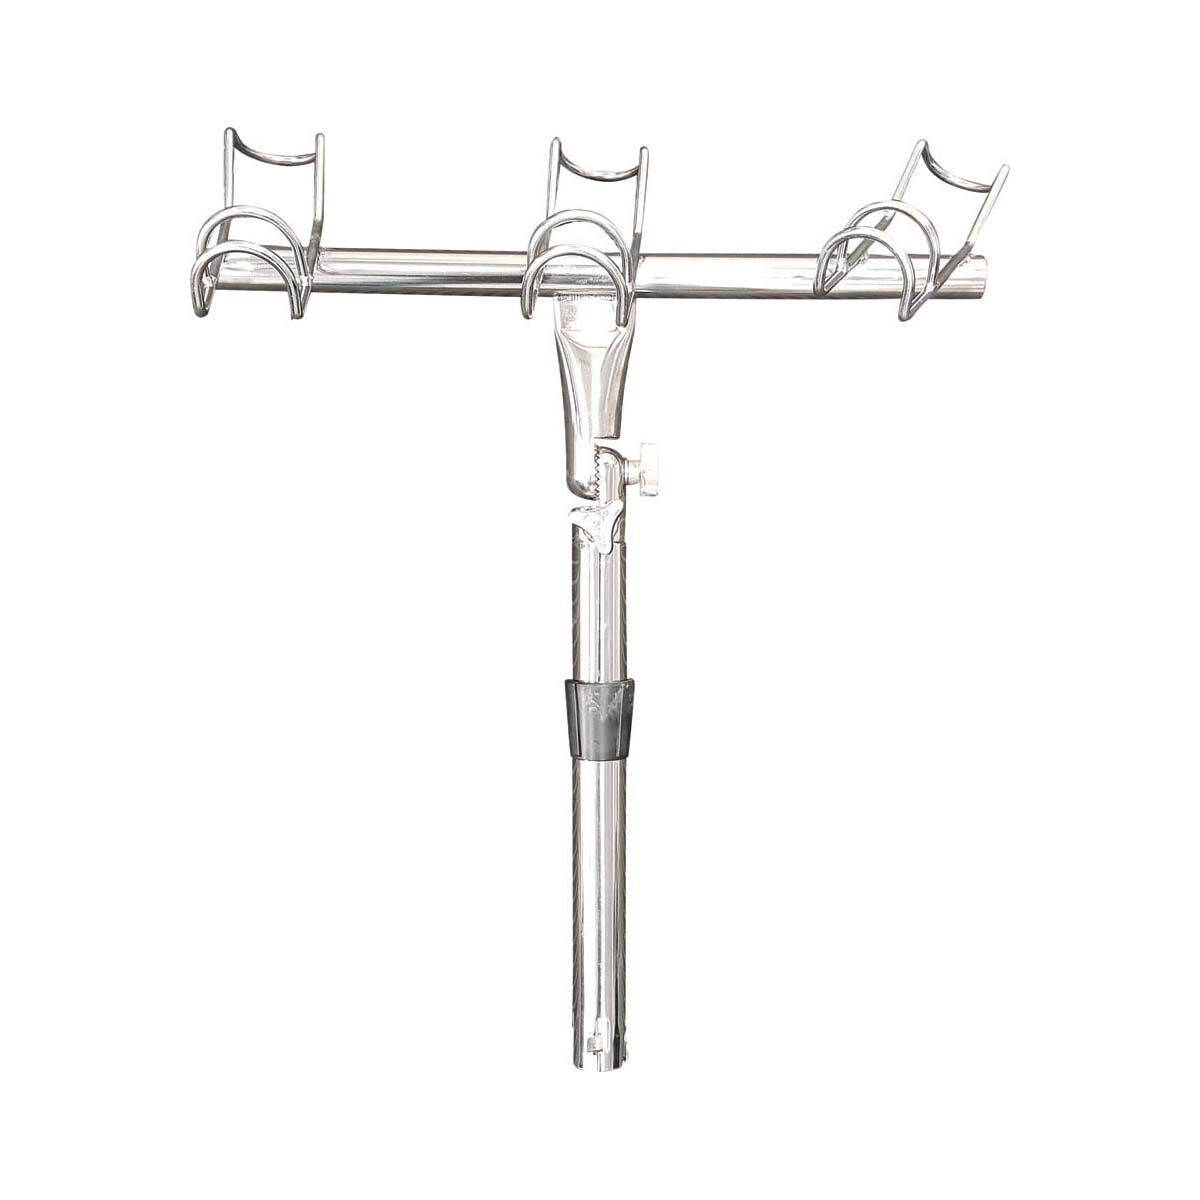 Boat Stainless Steel Fishing Rod Holder 3 Link Rack with Tool Well